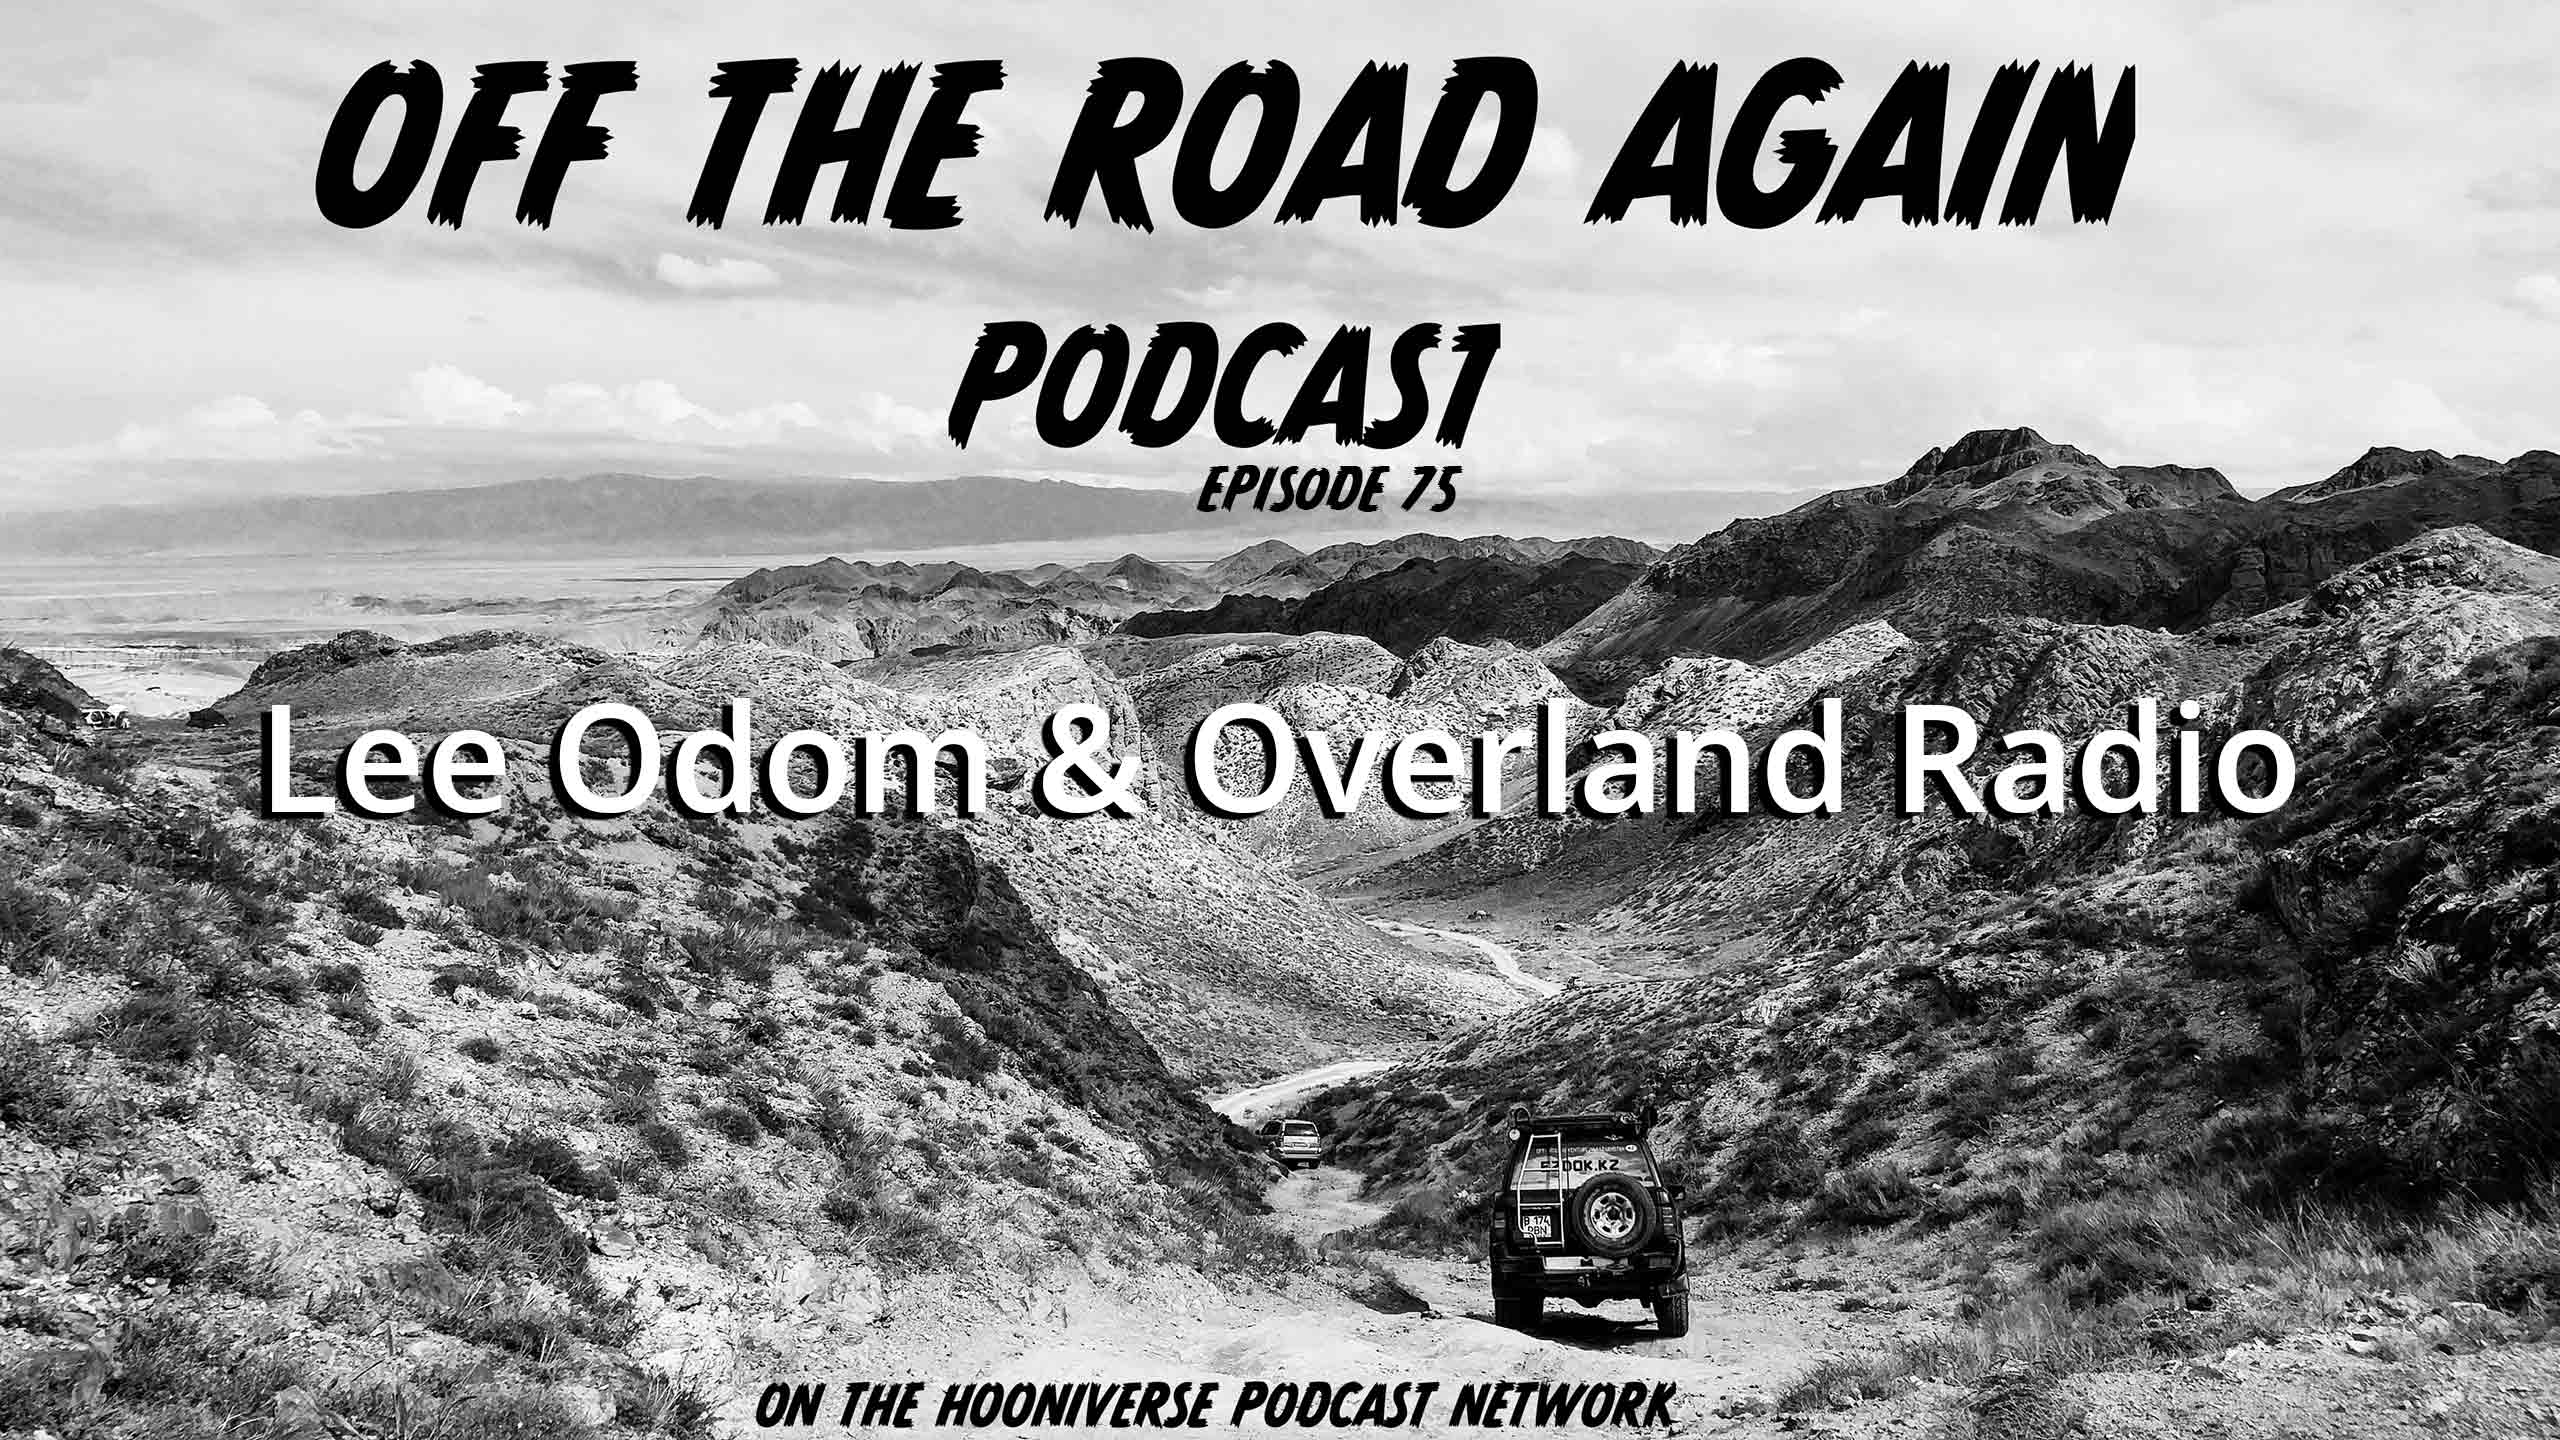 Lee-Odom-Overland-Radio-Off-The-Road-Again-Podcast-Episode-75